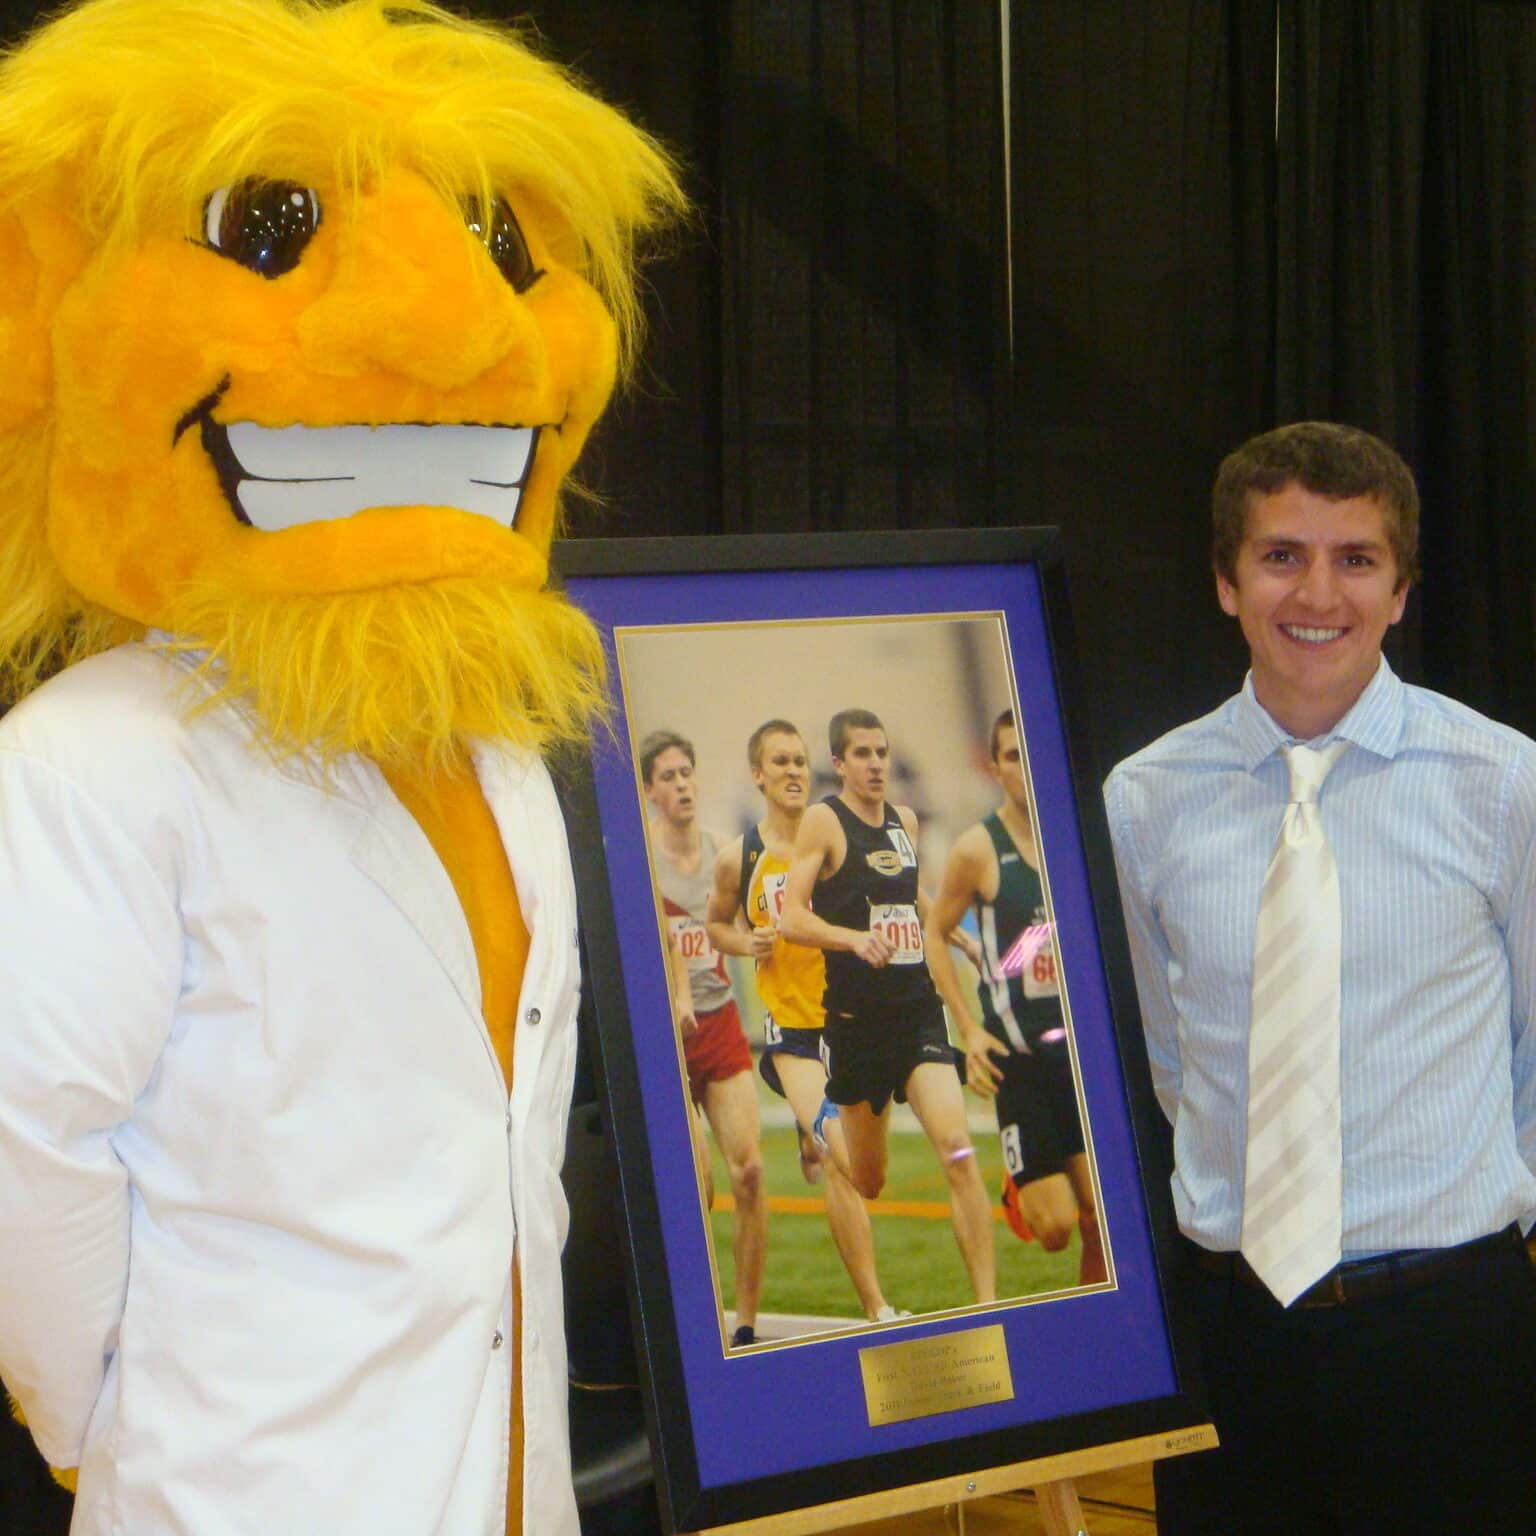 David Baker with Morty at All-American Ceremony